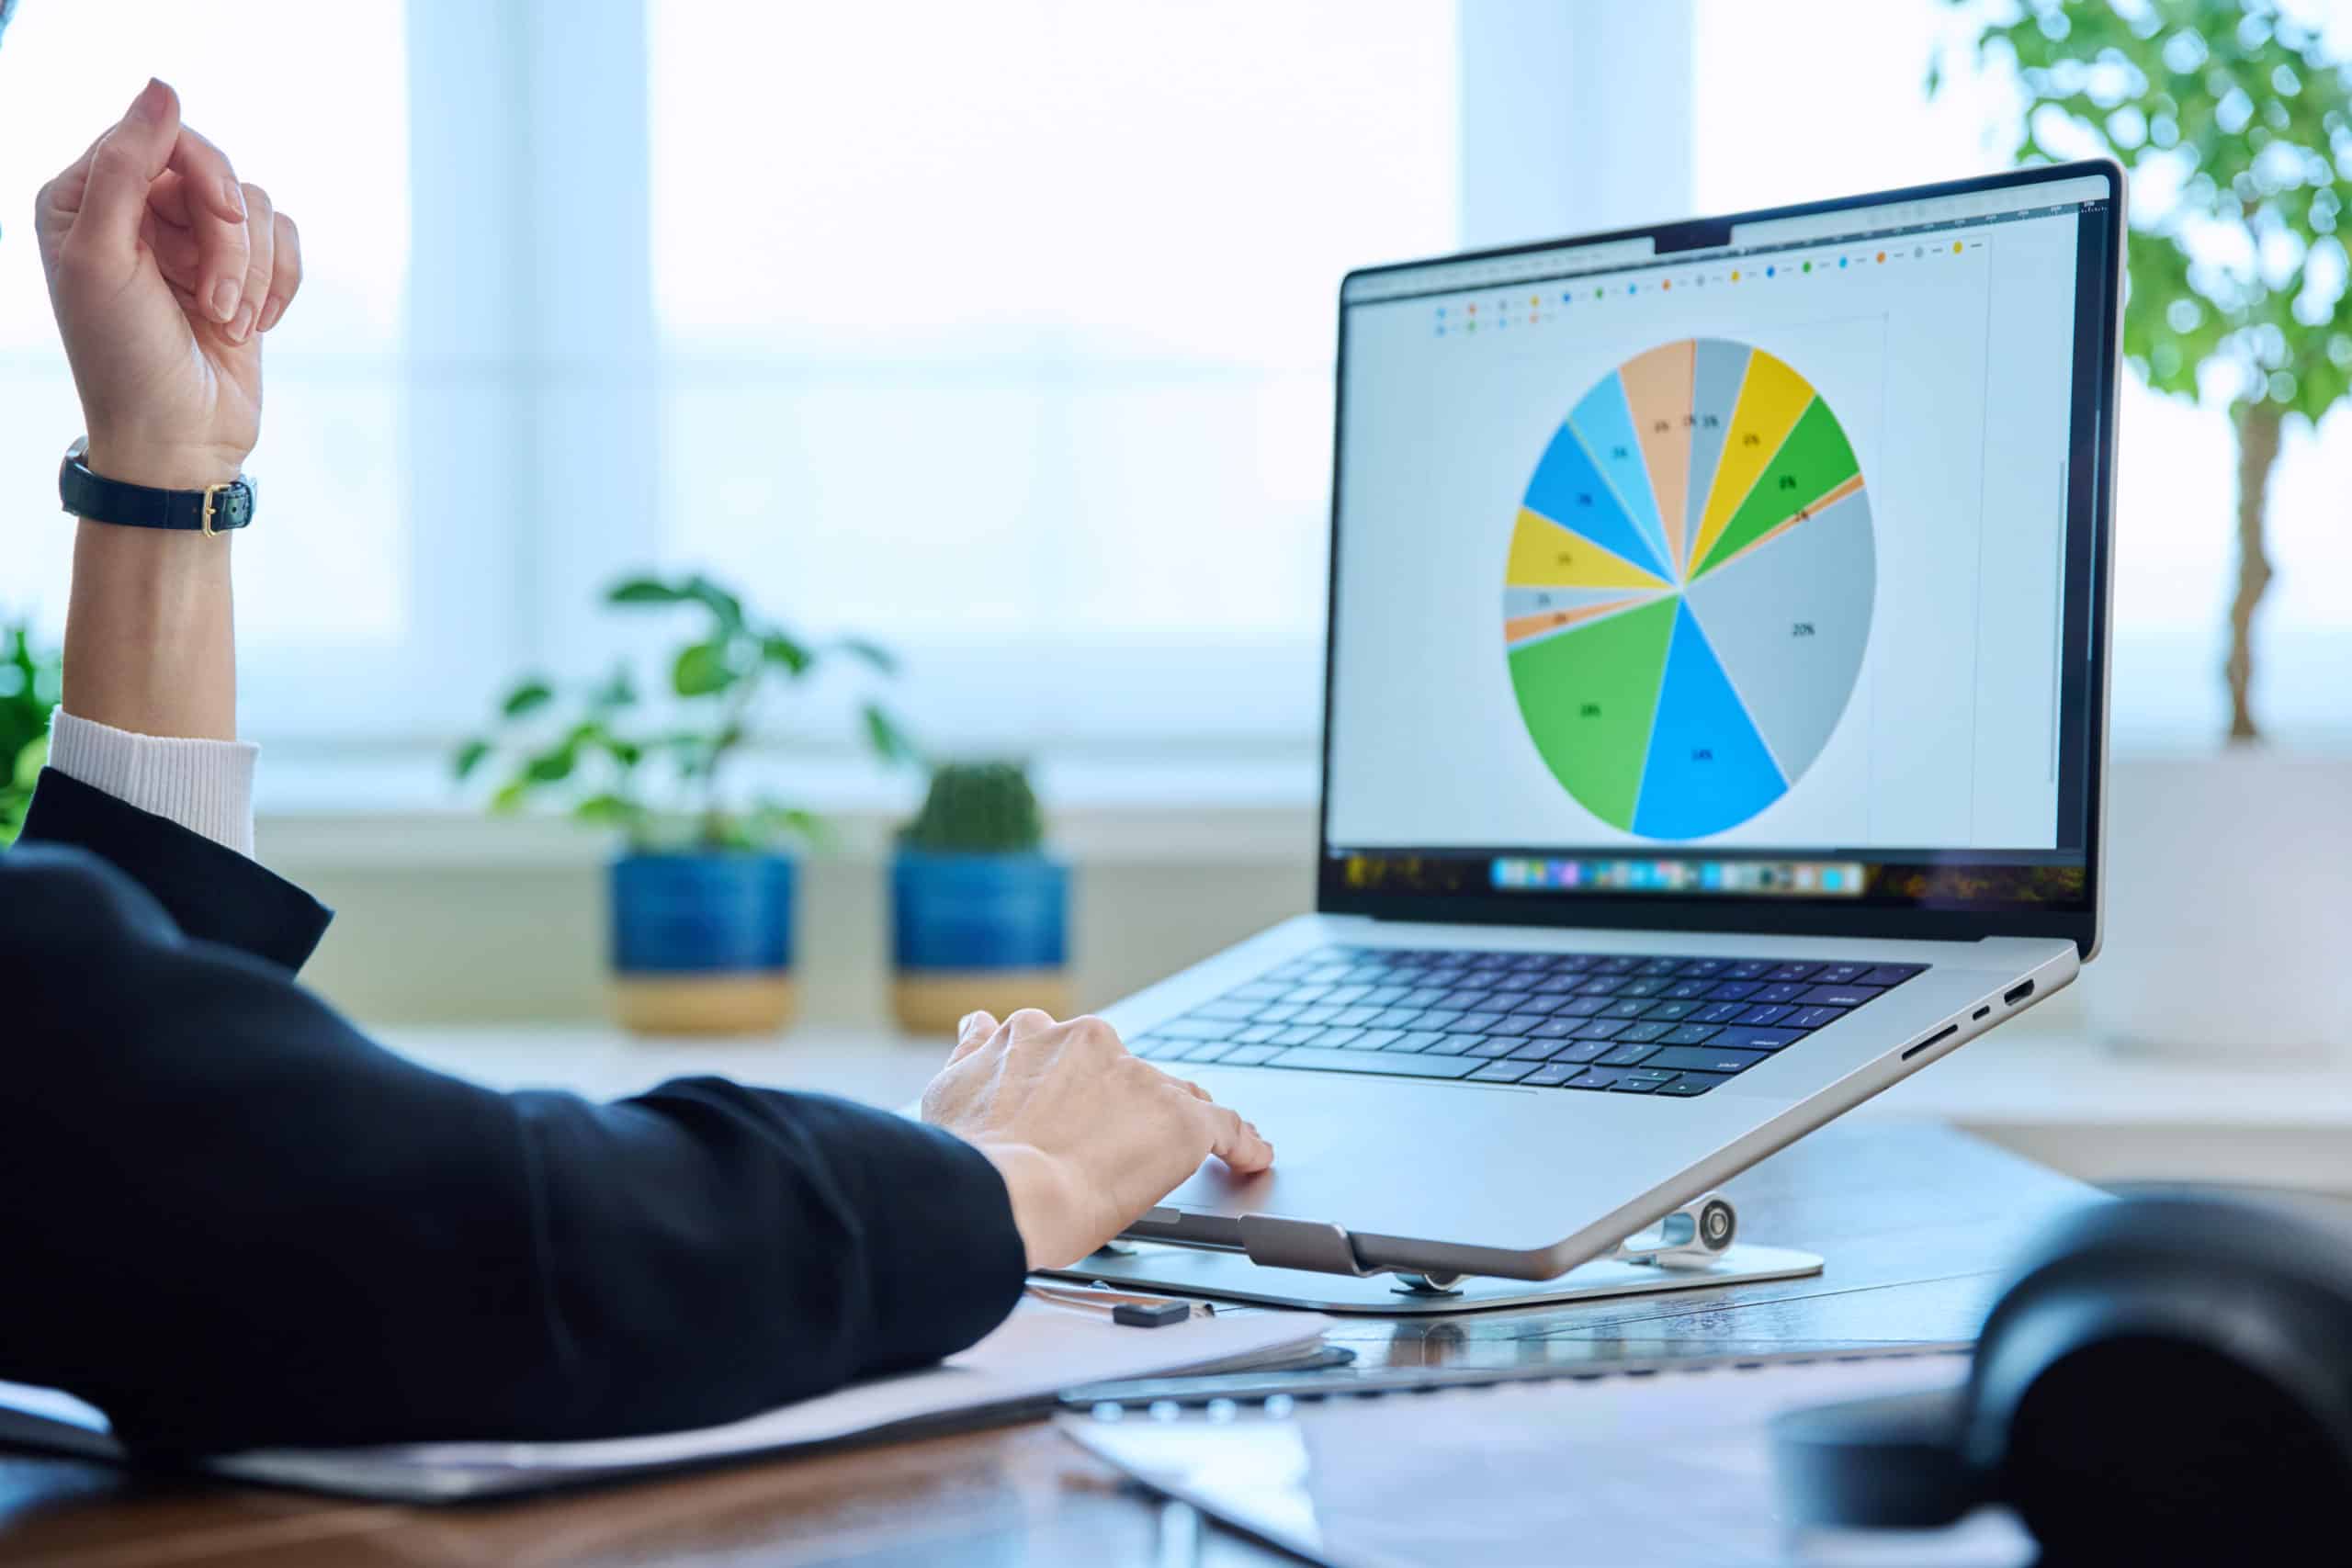 Office worker looking at laptop screen which shows a pie chart